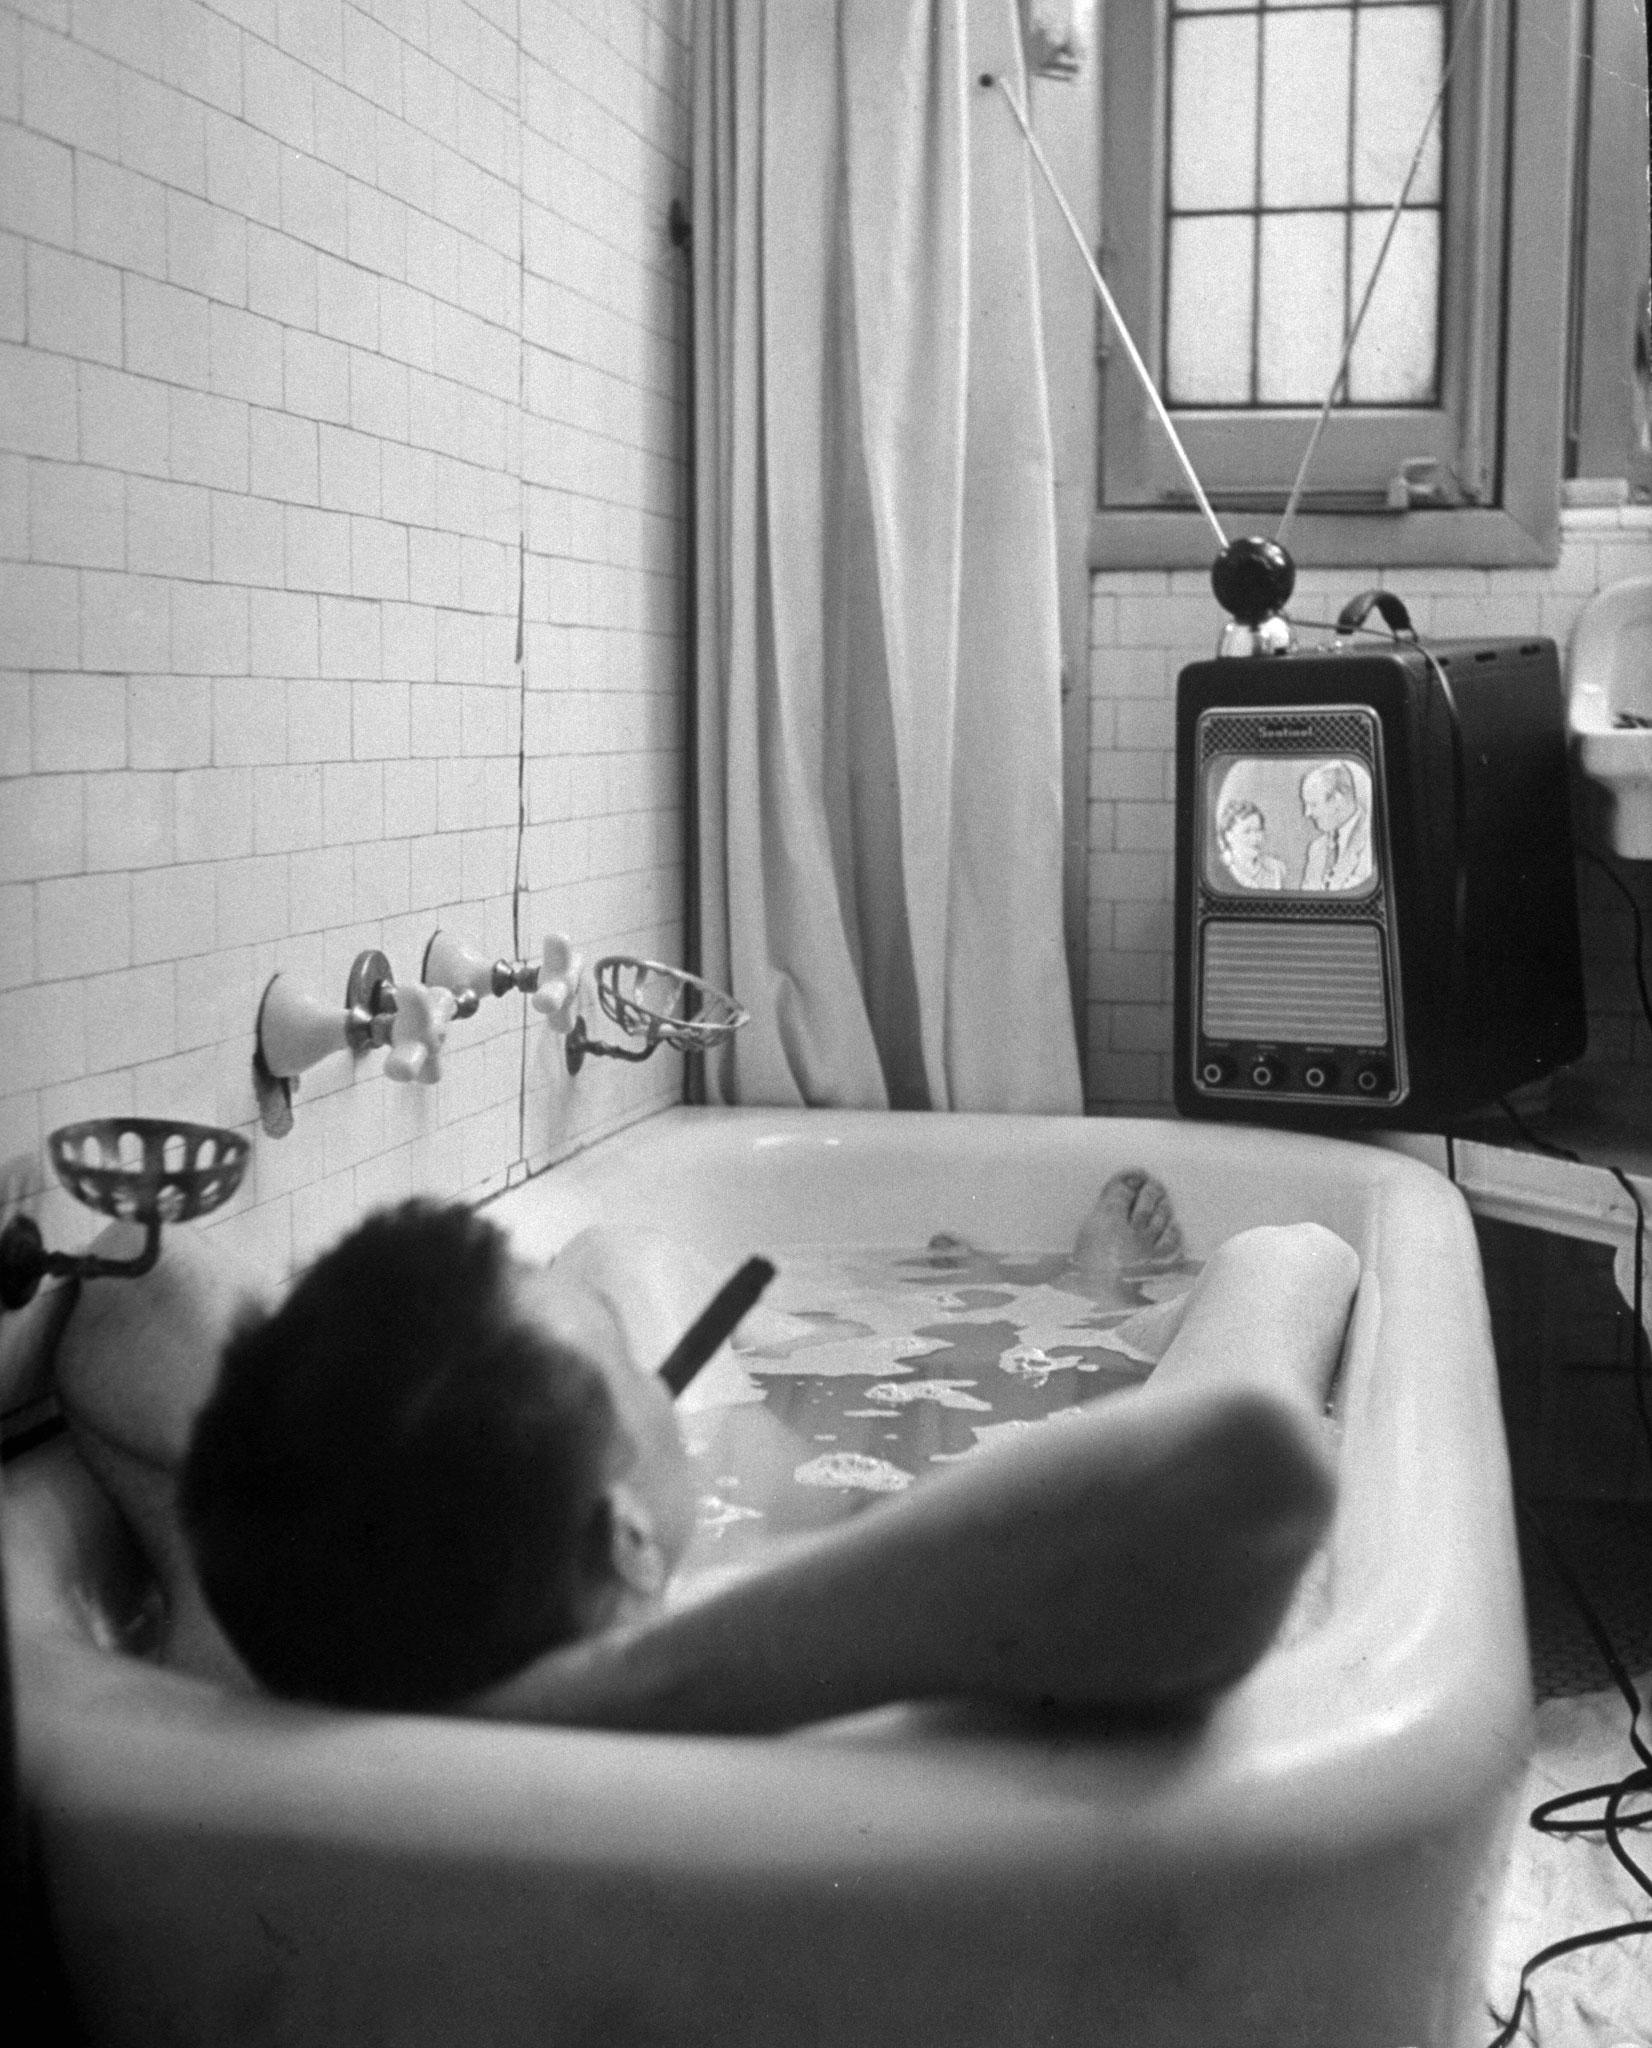 A Man enjoys a smoke, a bath and a TV show in 1948. Photograph by George Skadding for Life Magazine.jpg